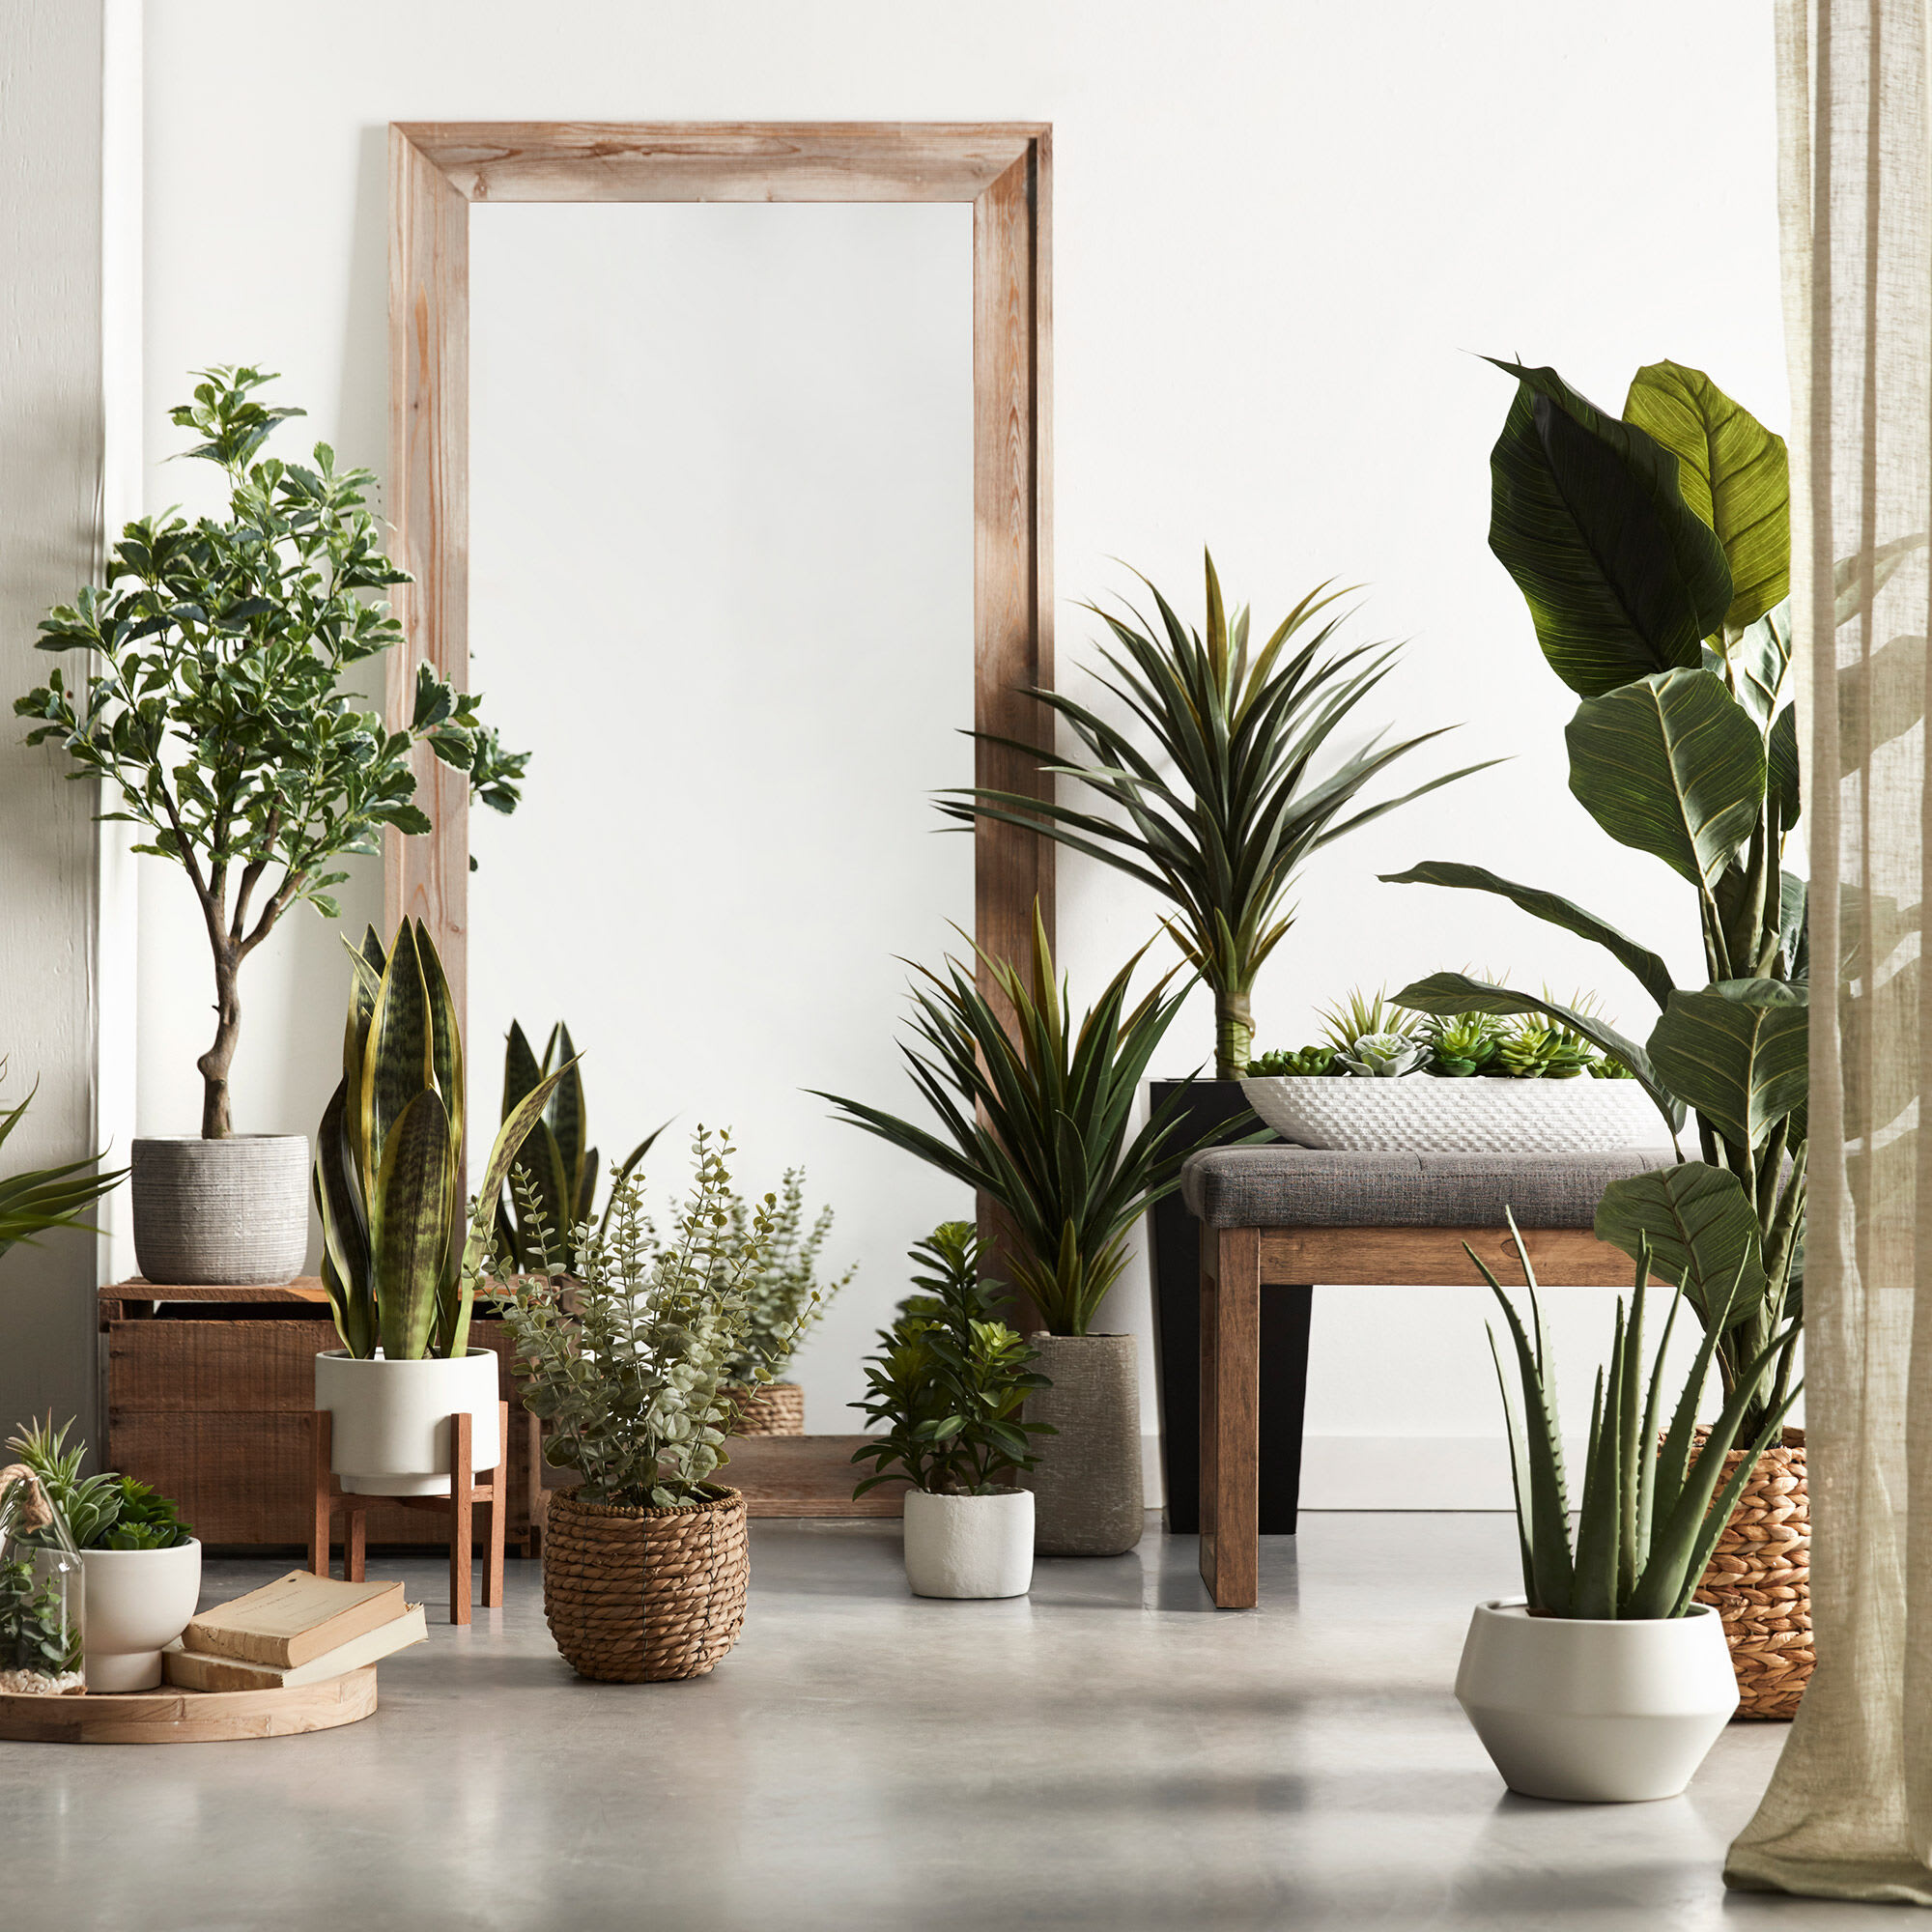 Buy Fake Plants Online 20 Stores With The Best Faux Greenery ...